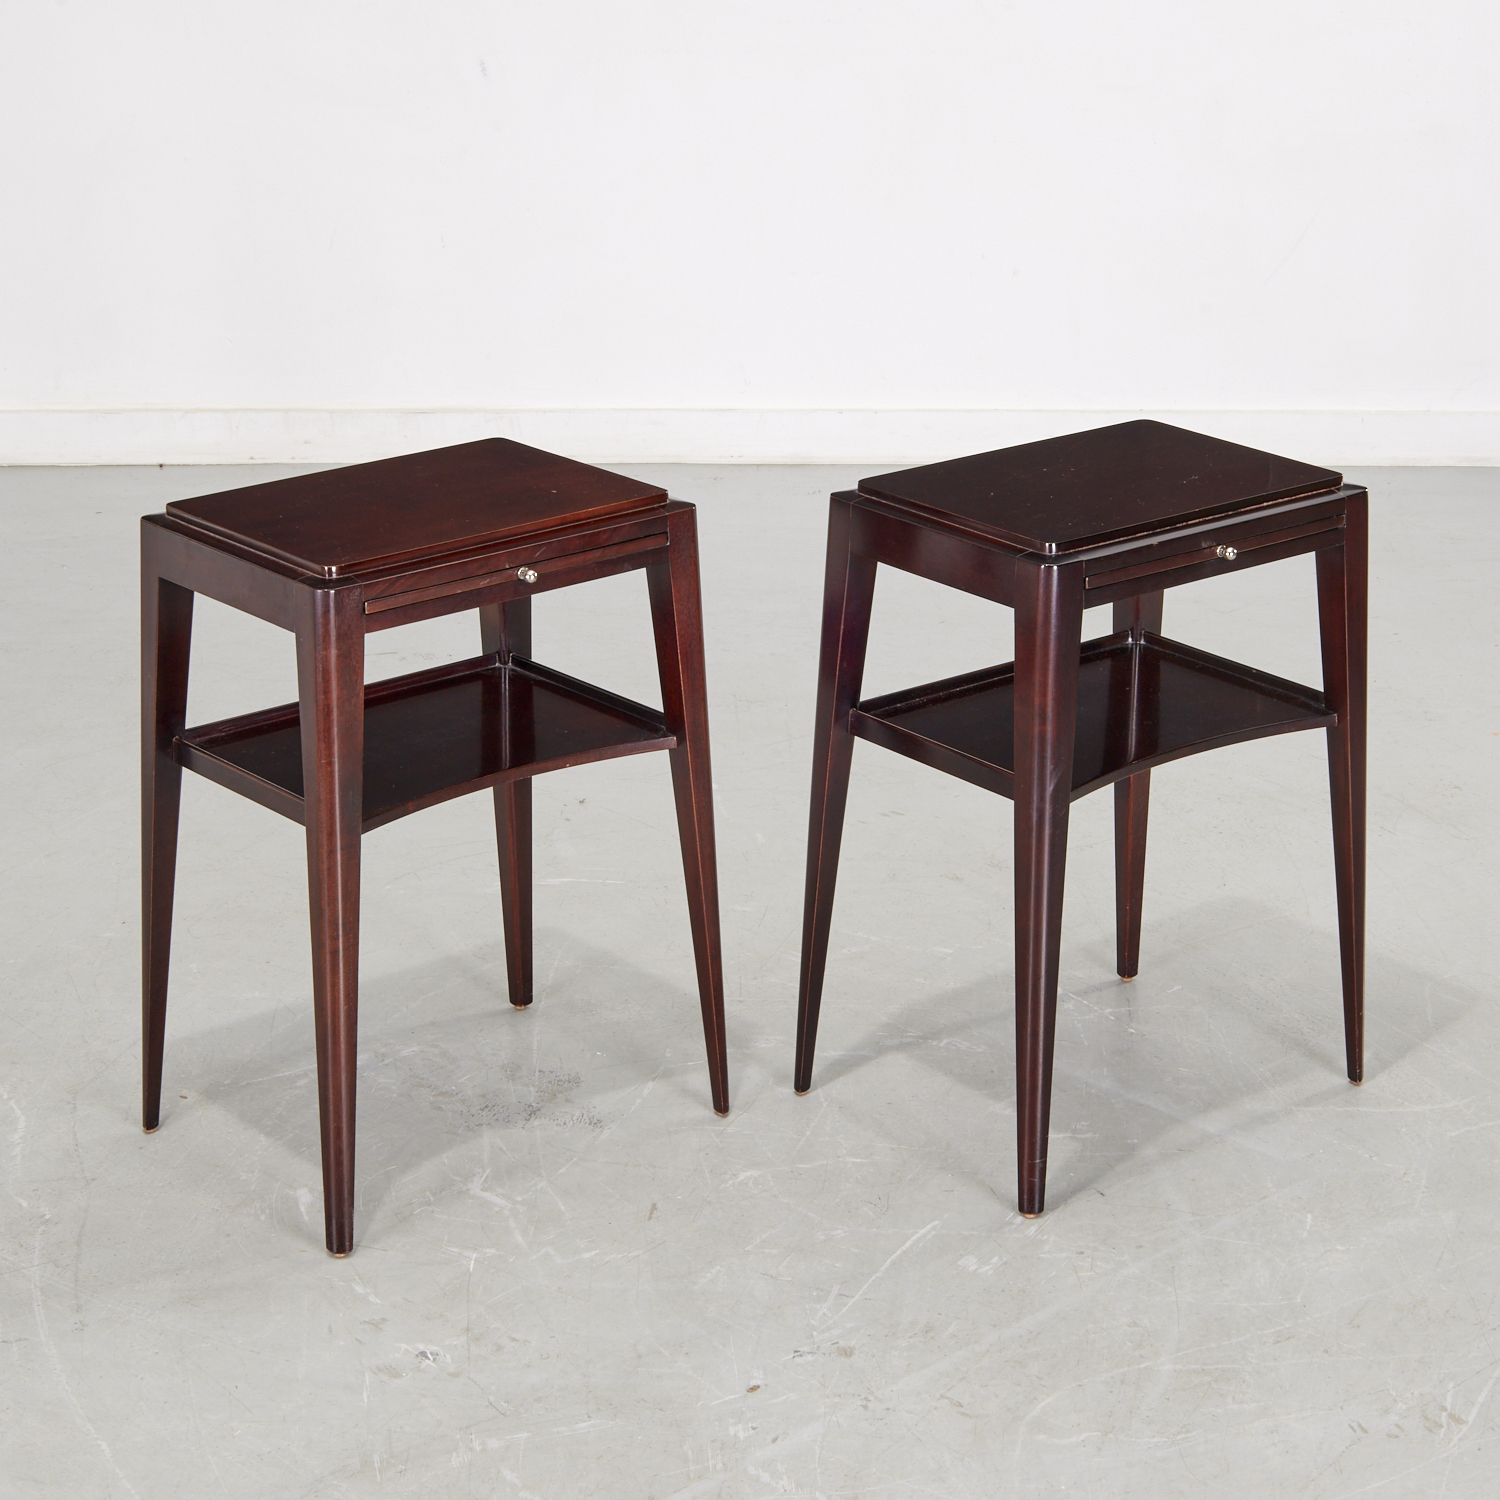 BARBARA BARRY FOR BAKER, PAIR SIDE TABLES